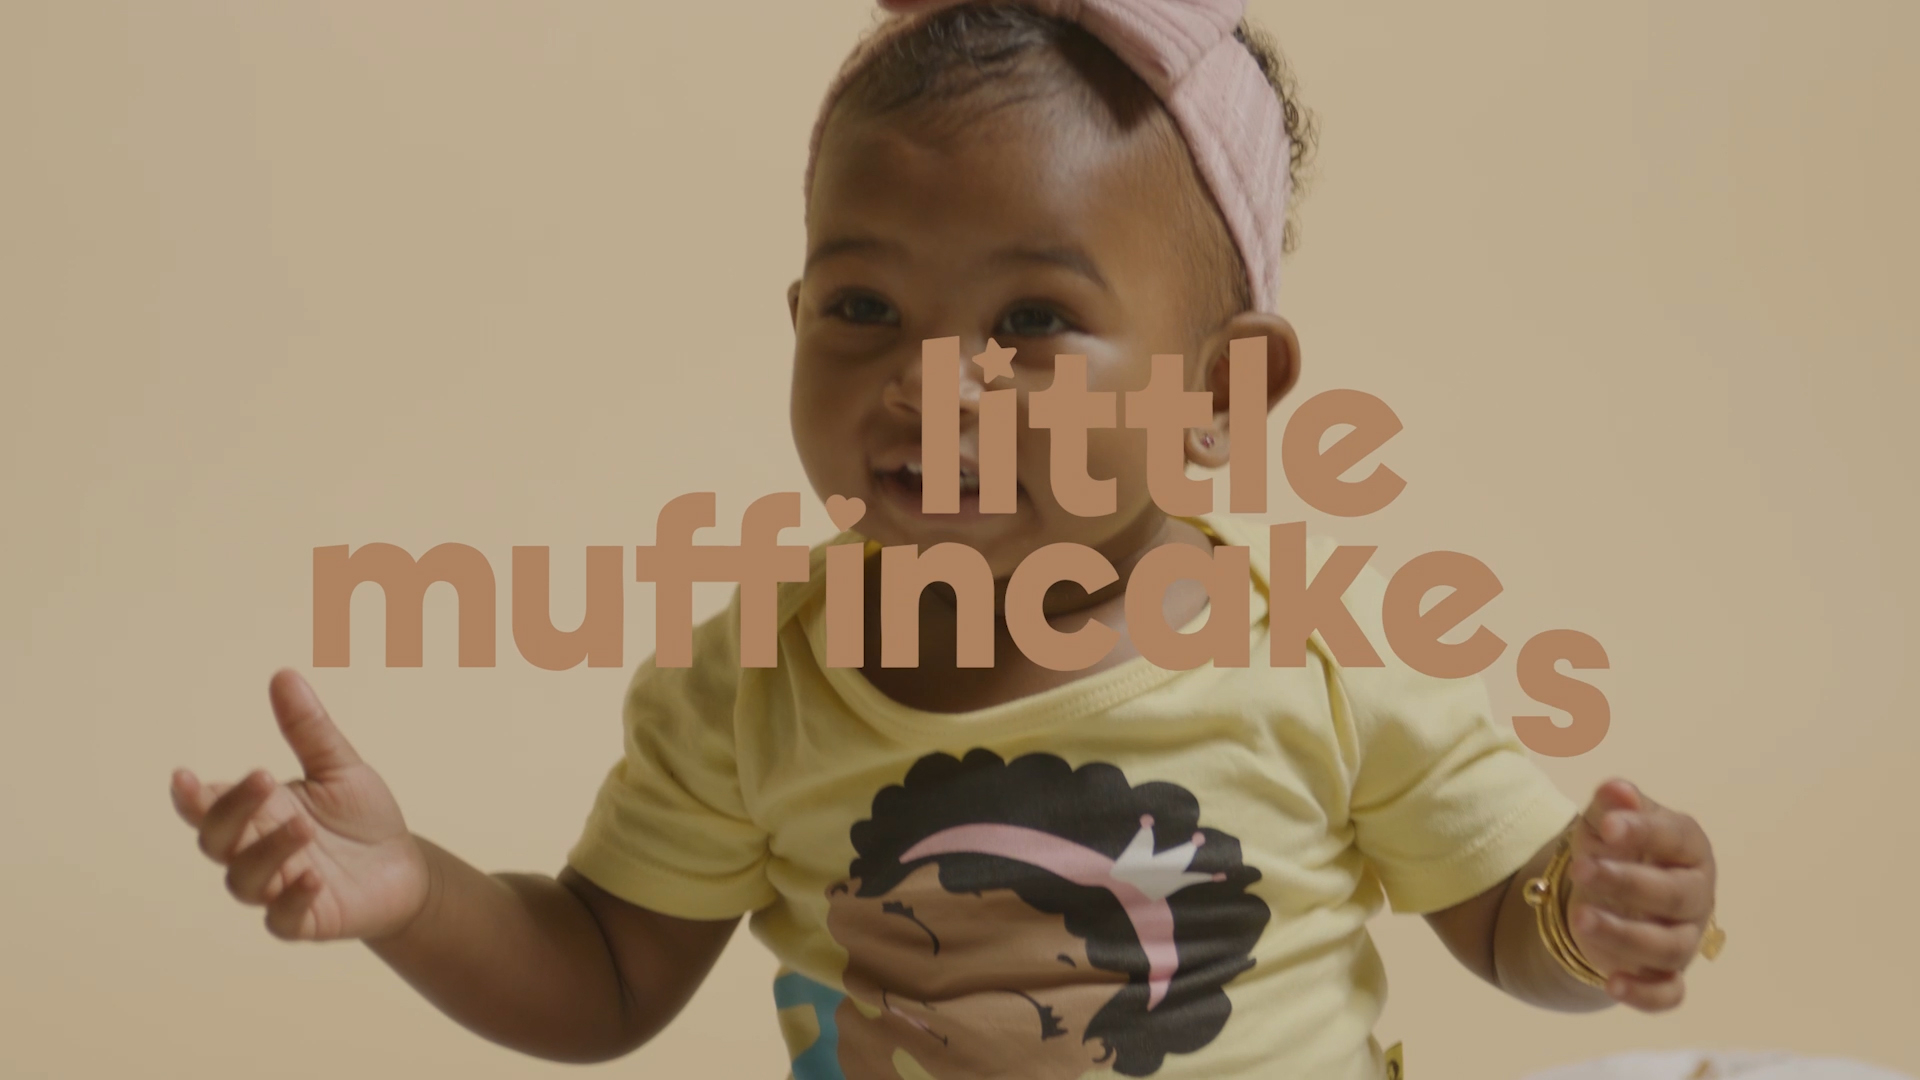 Little Muffincakes Promotional Video